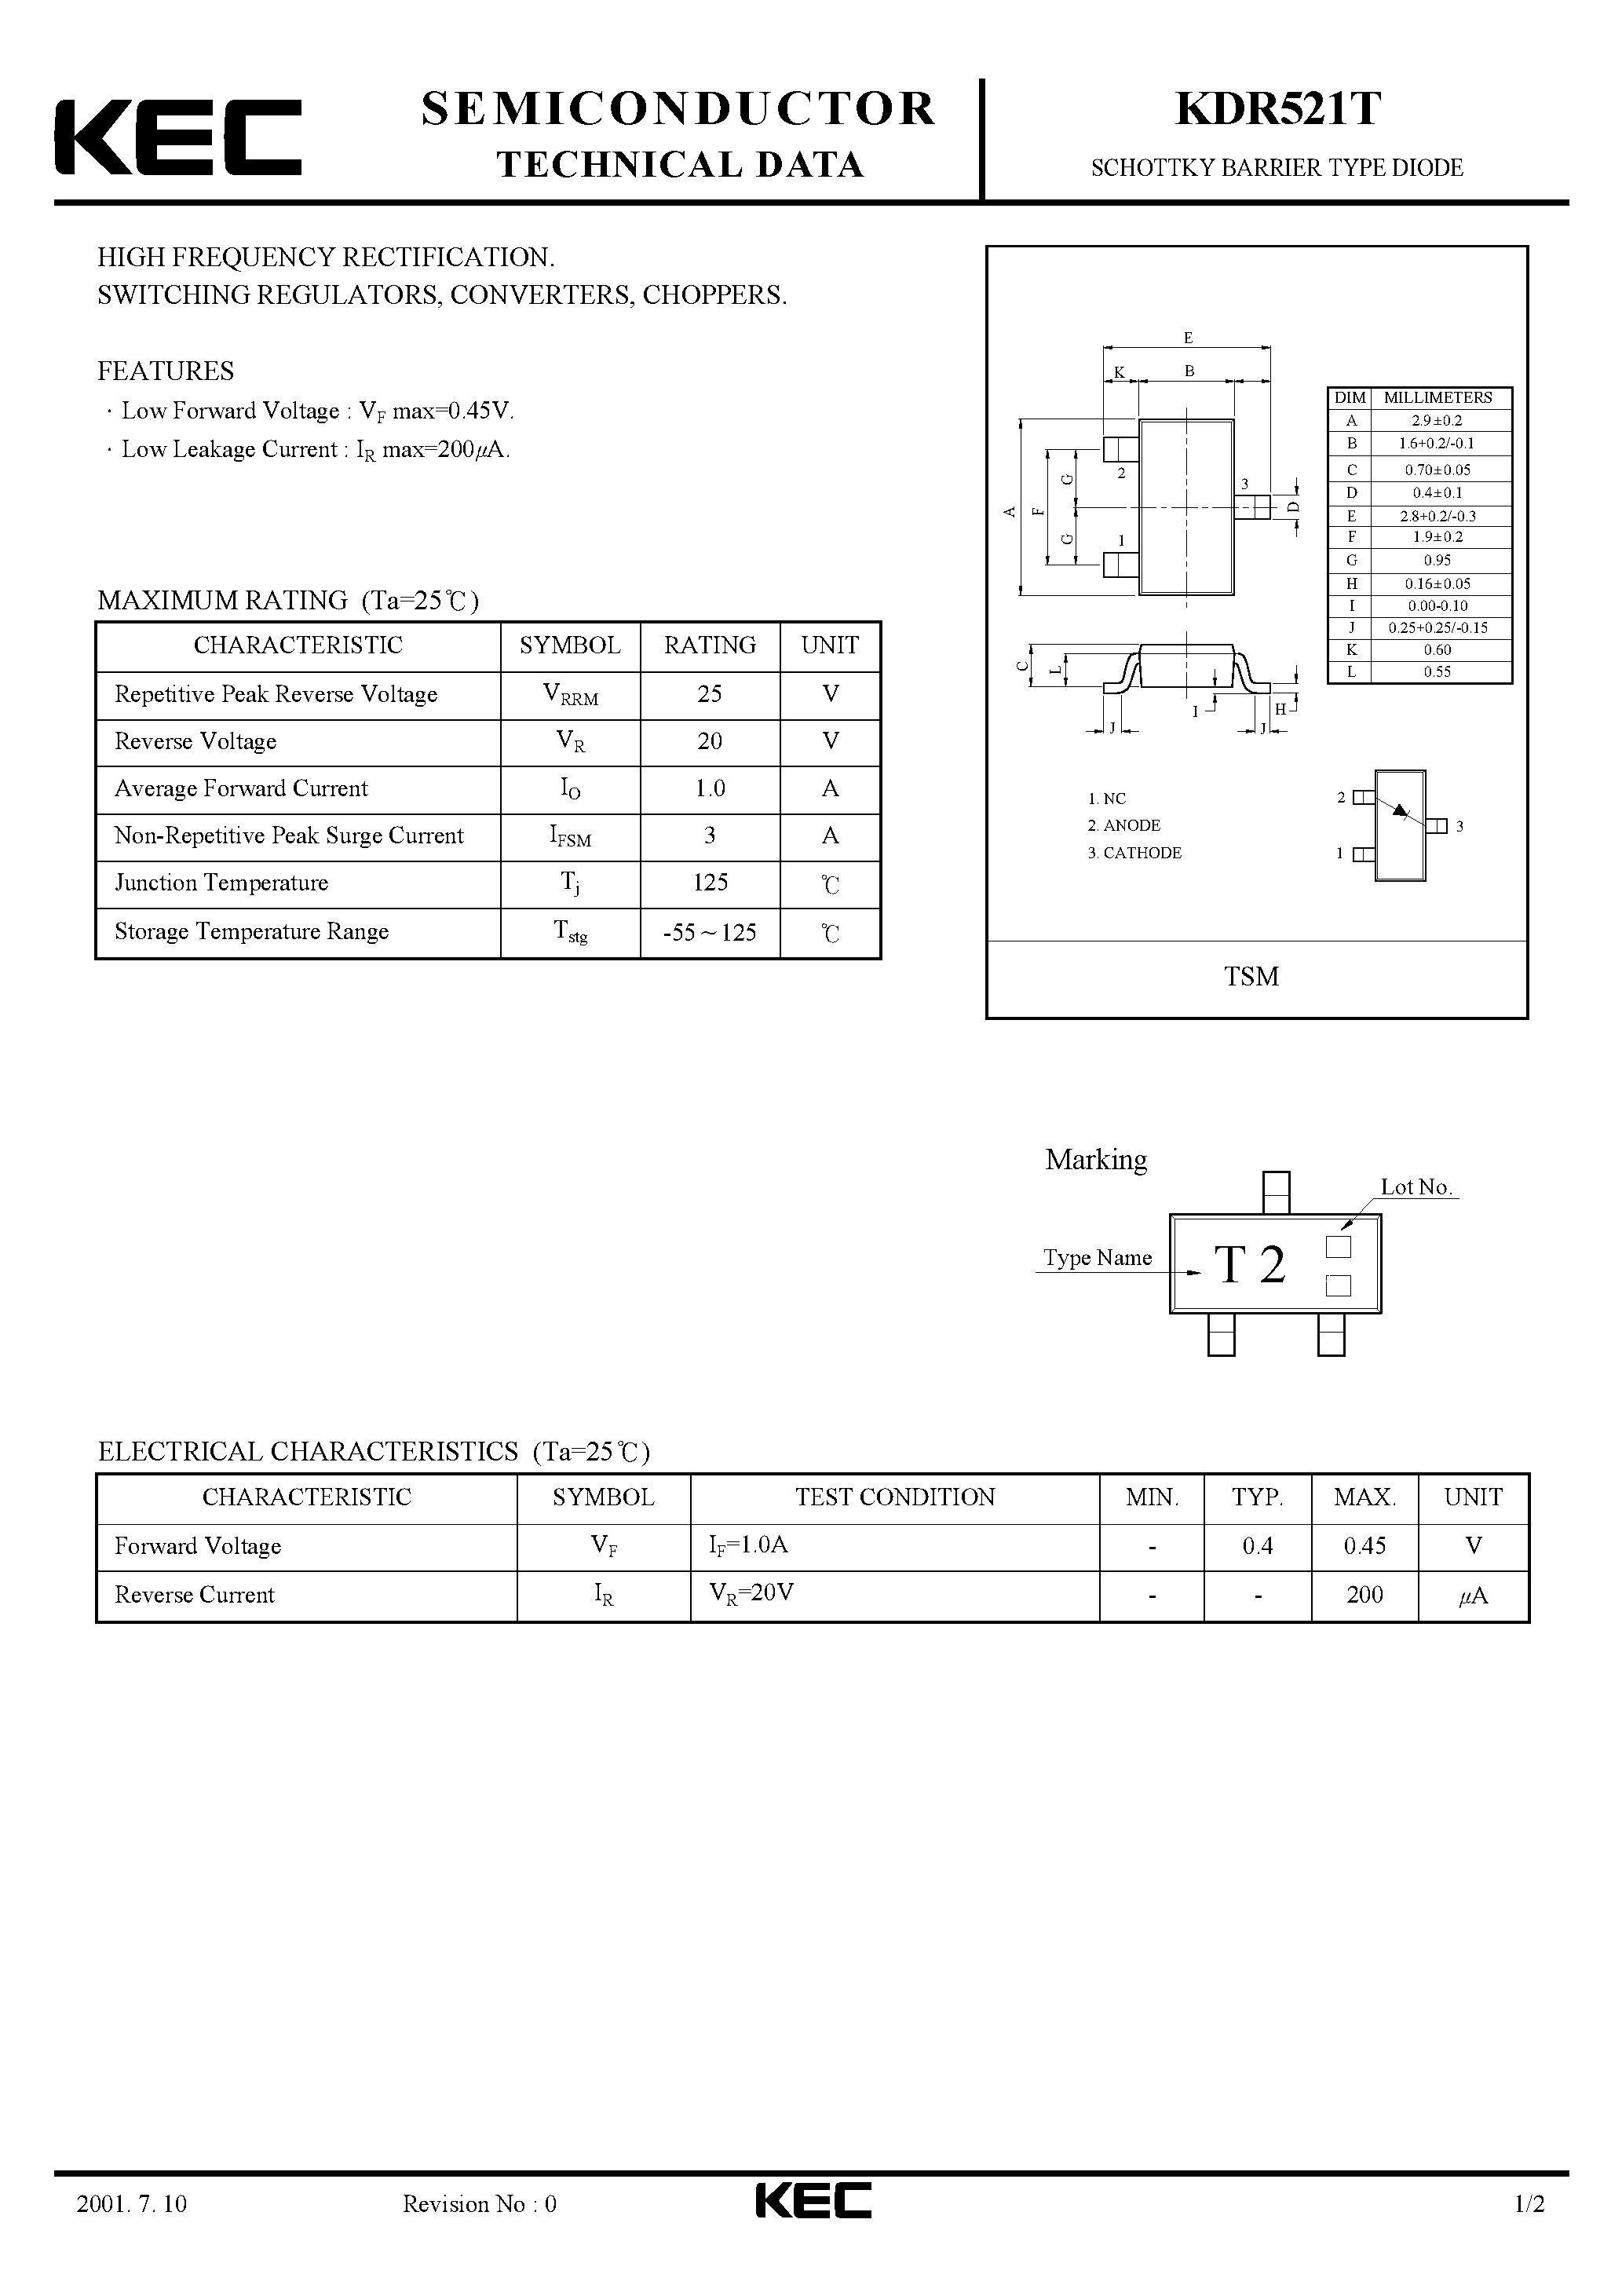 Datasheet KDR521T - SCHOTTKY BARRIER TYPE DIODE(HIGH FREQUENCY RECTIFICATION/ SWITCHING/ REGULATORS/ CONVERTERS/ CHOPPERS) page 1